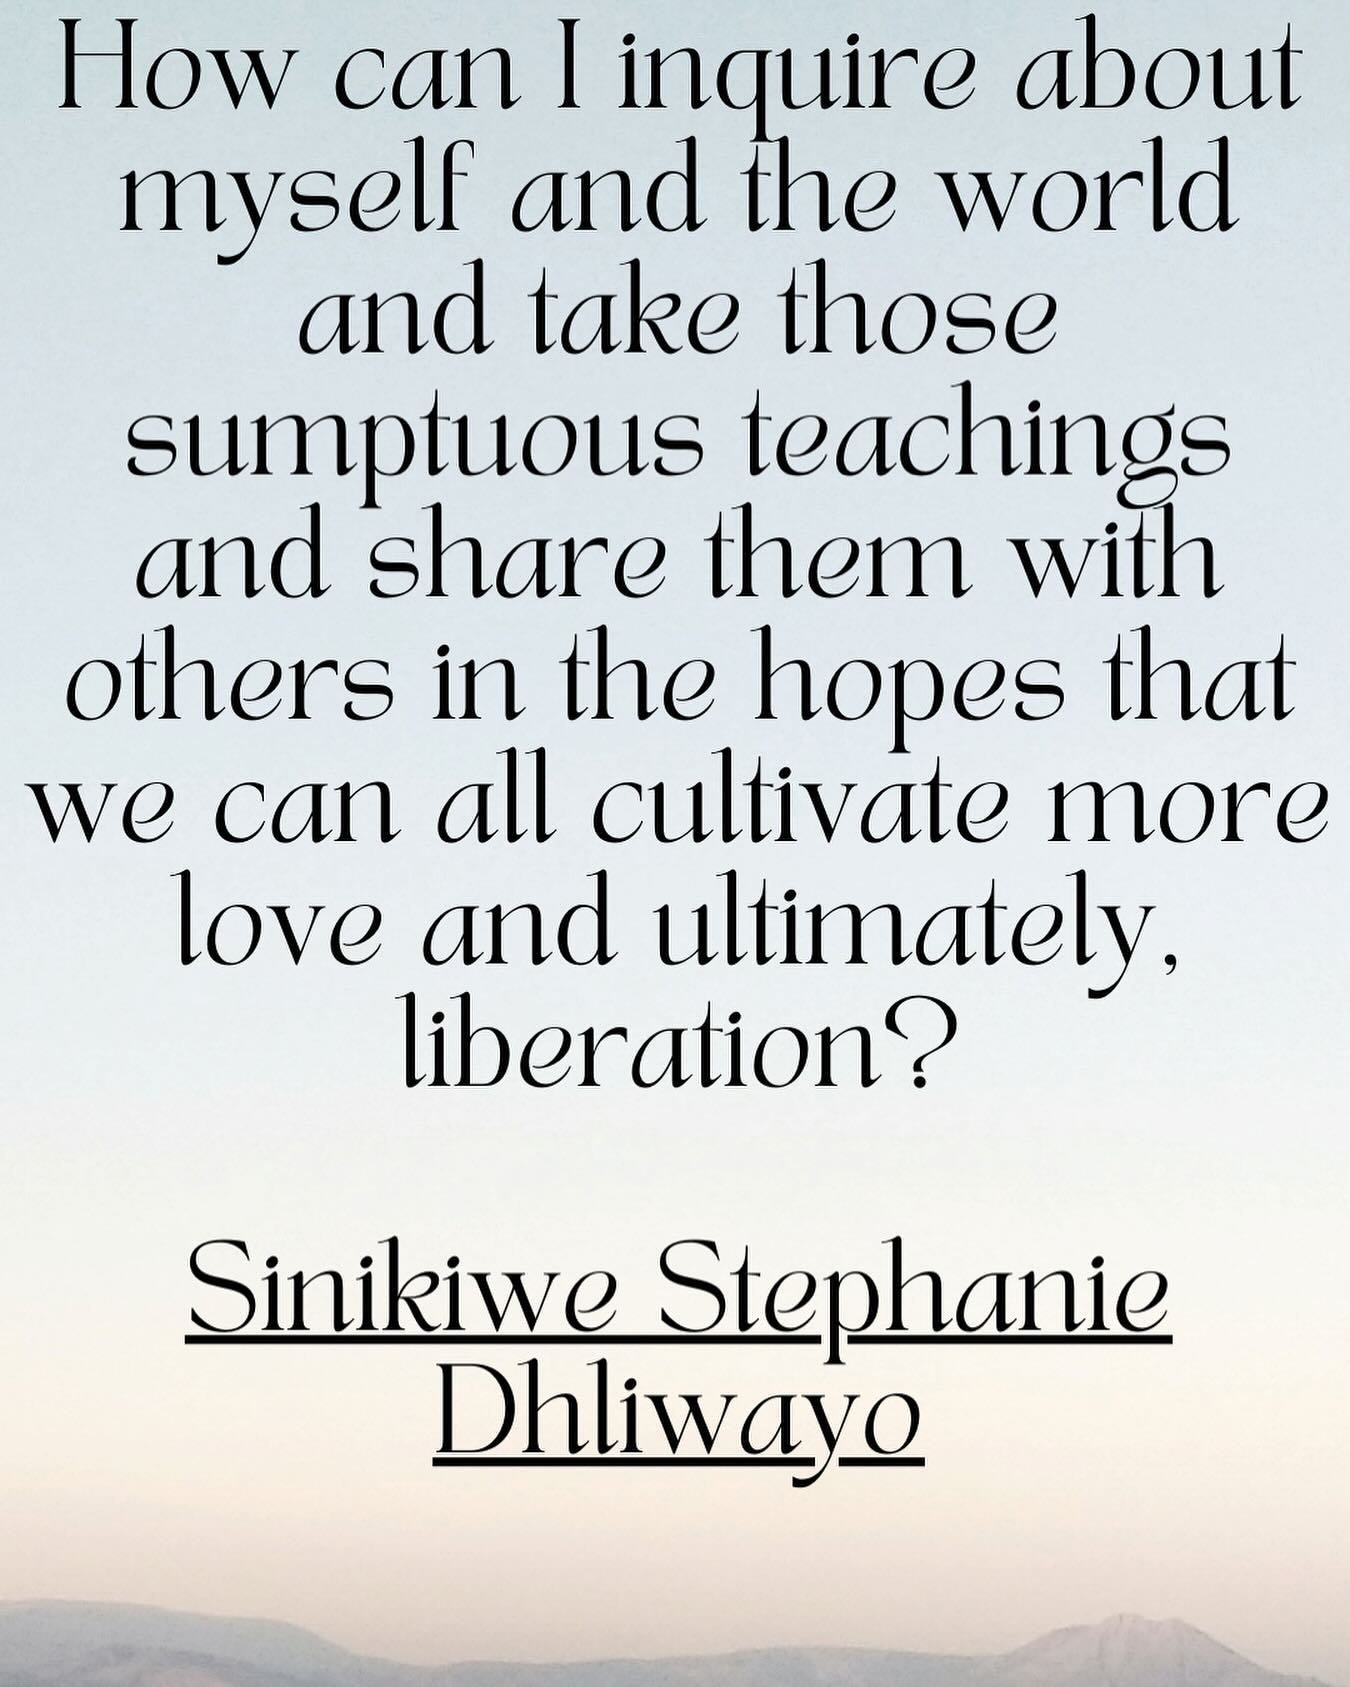 This inquiry felt like the medicine I needed after a week of being immersed in the news cycle more than usual. The teachings that Sinikiwe Stephanie Dhliwayo refers to are the ones she receives in self-led meditations, where she explores what is aliv